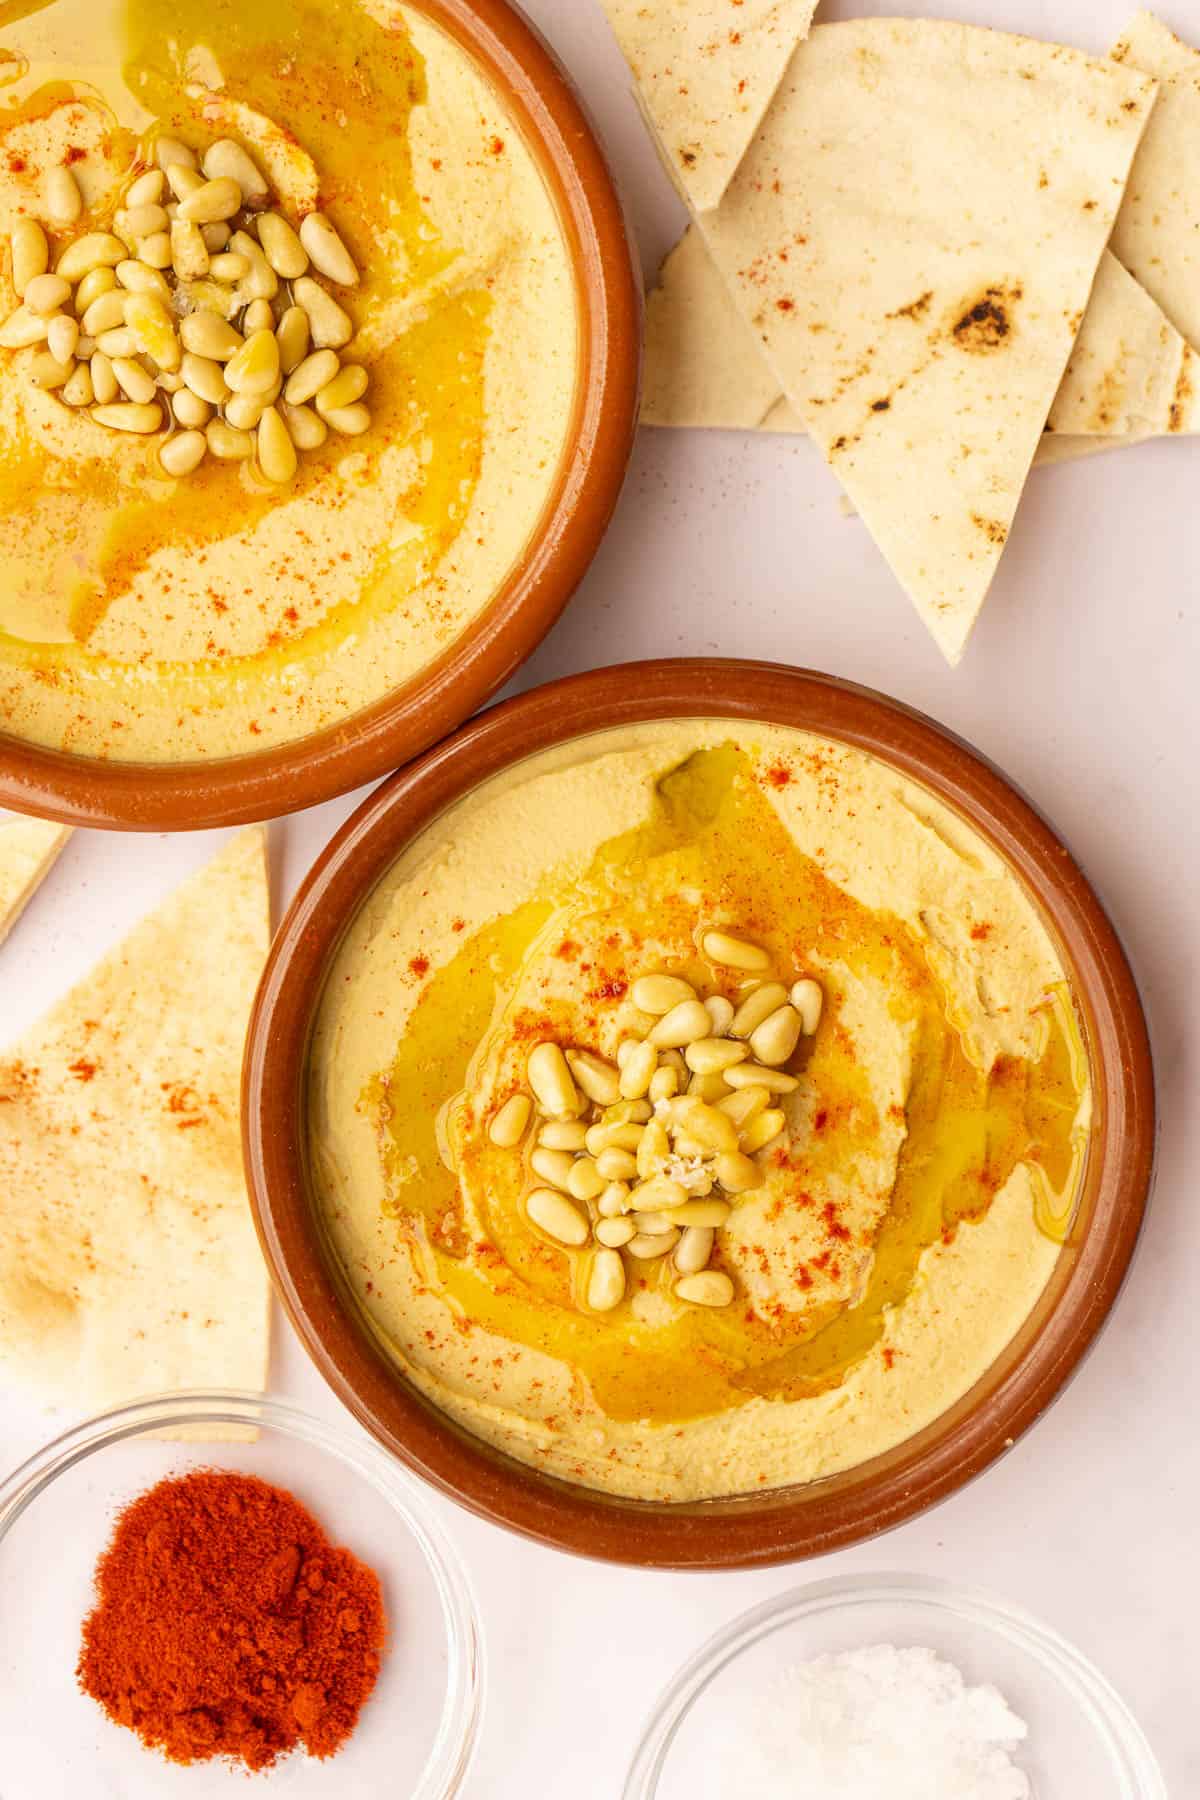 Two clay bowls of hummus topped with pine nuts, olive oil, and paprika. Pita bread and paprika in the background.